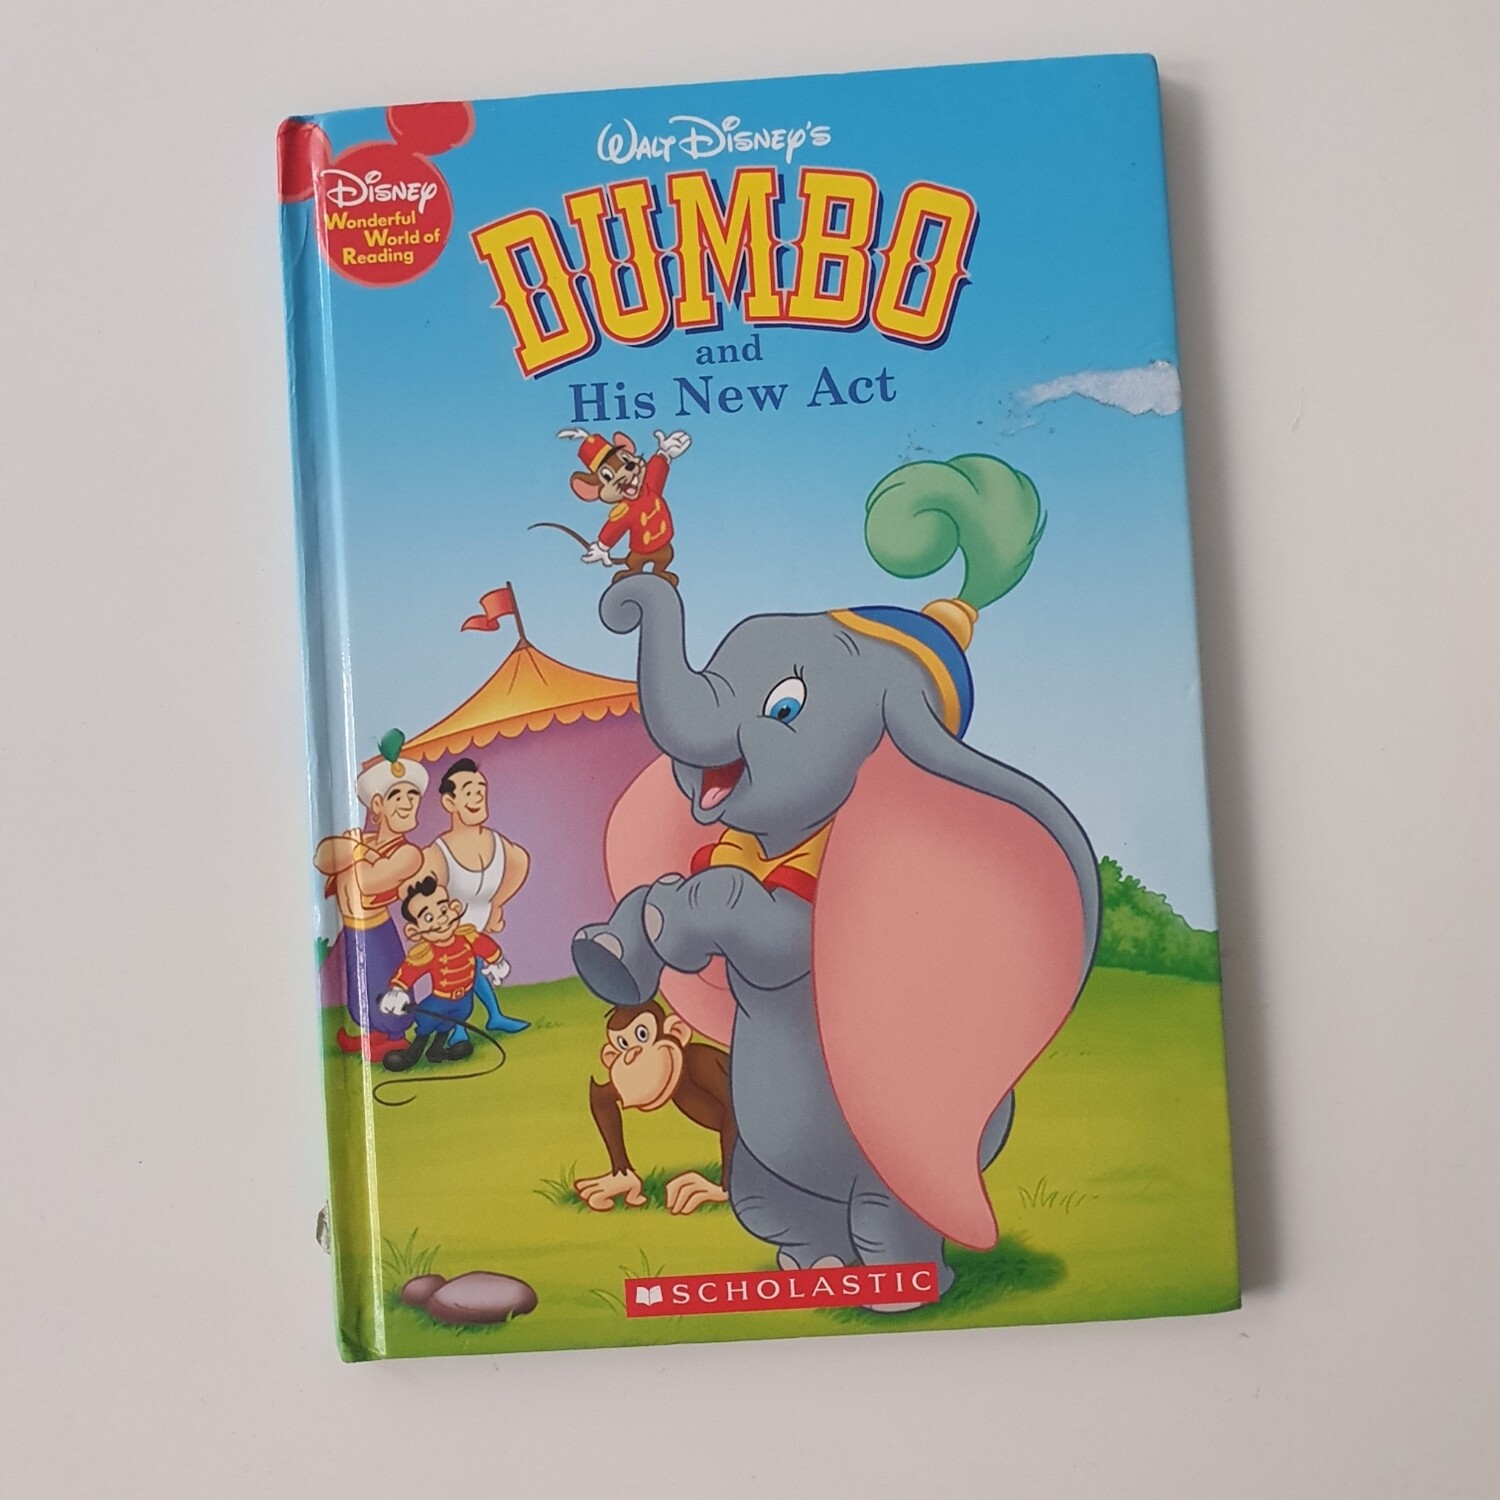 Dumbo and his New Act